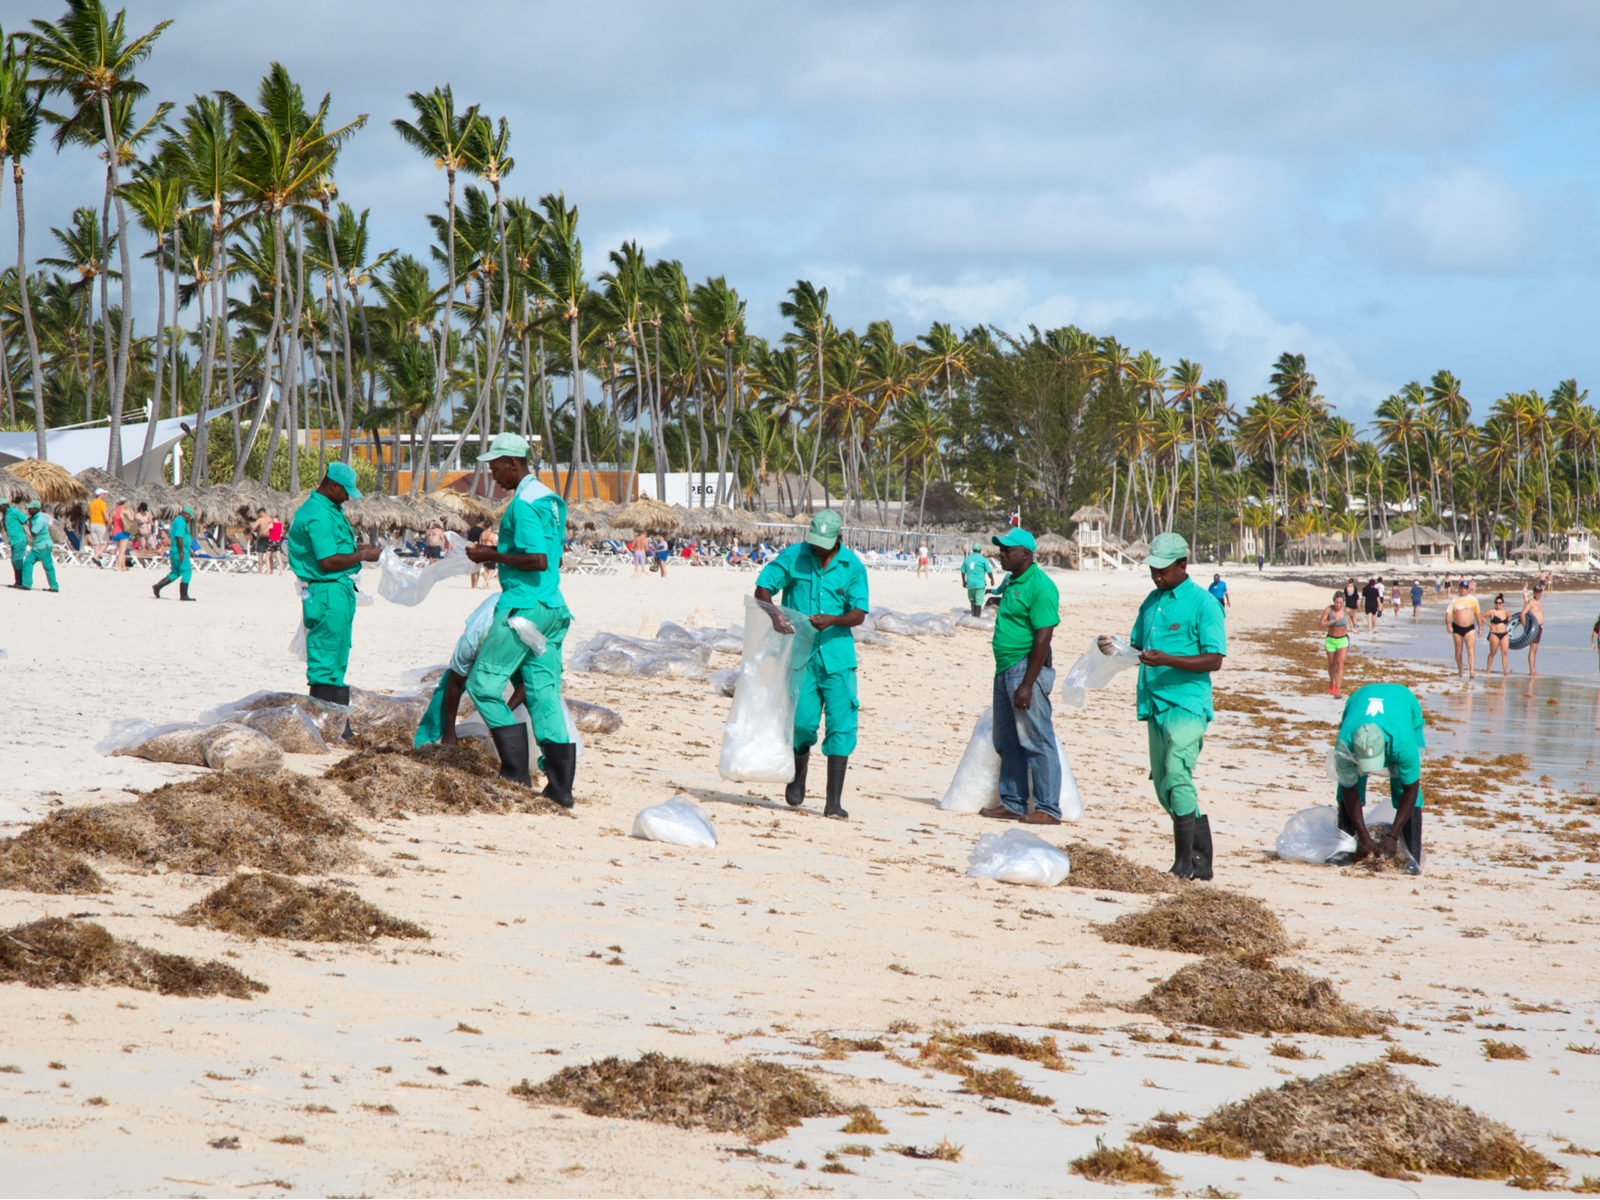 Punta Cana (one of the best beaches in the Dominican Republic) workers picking up seaweed